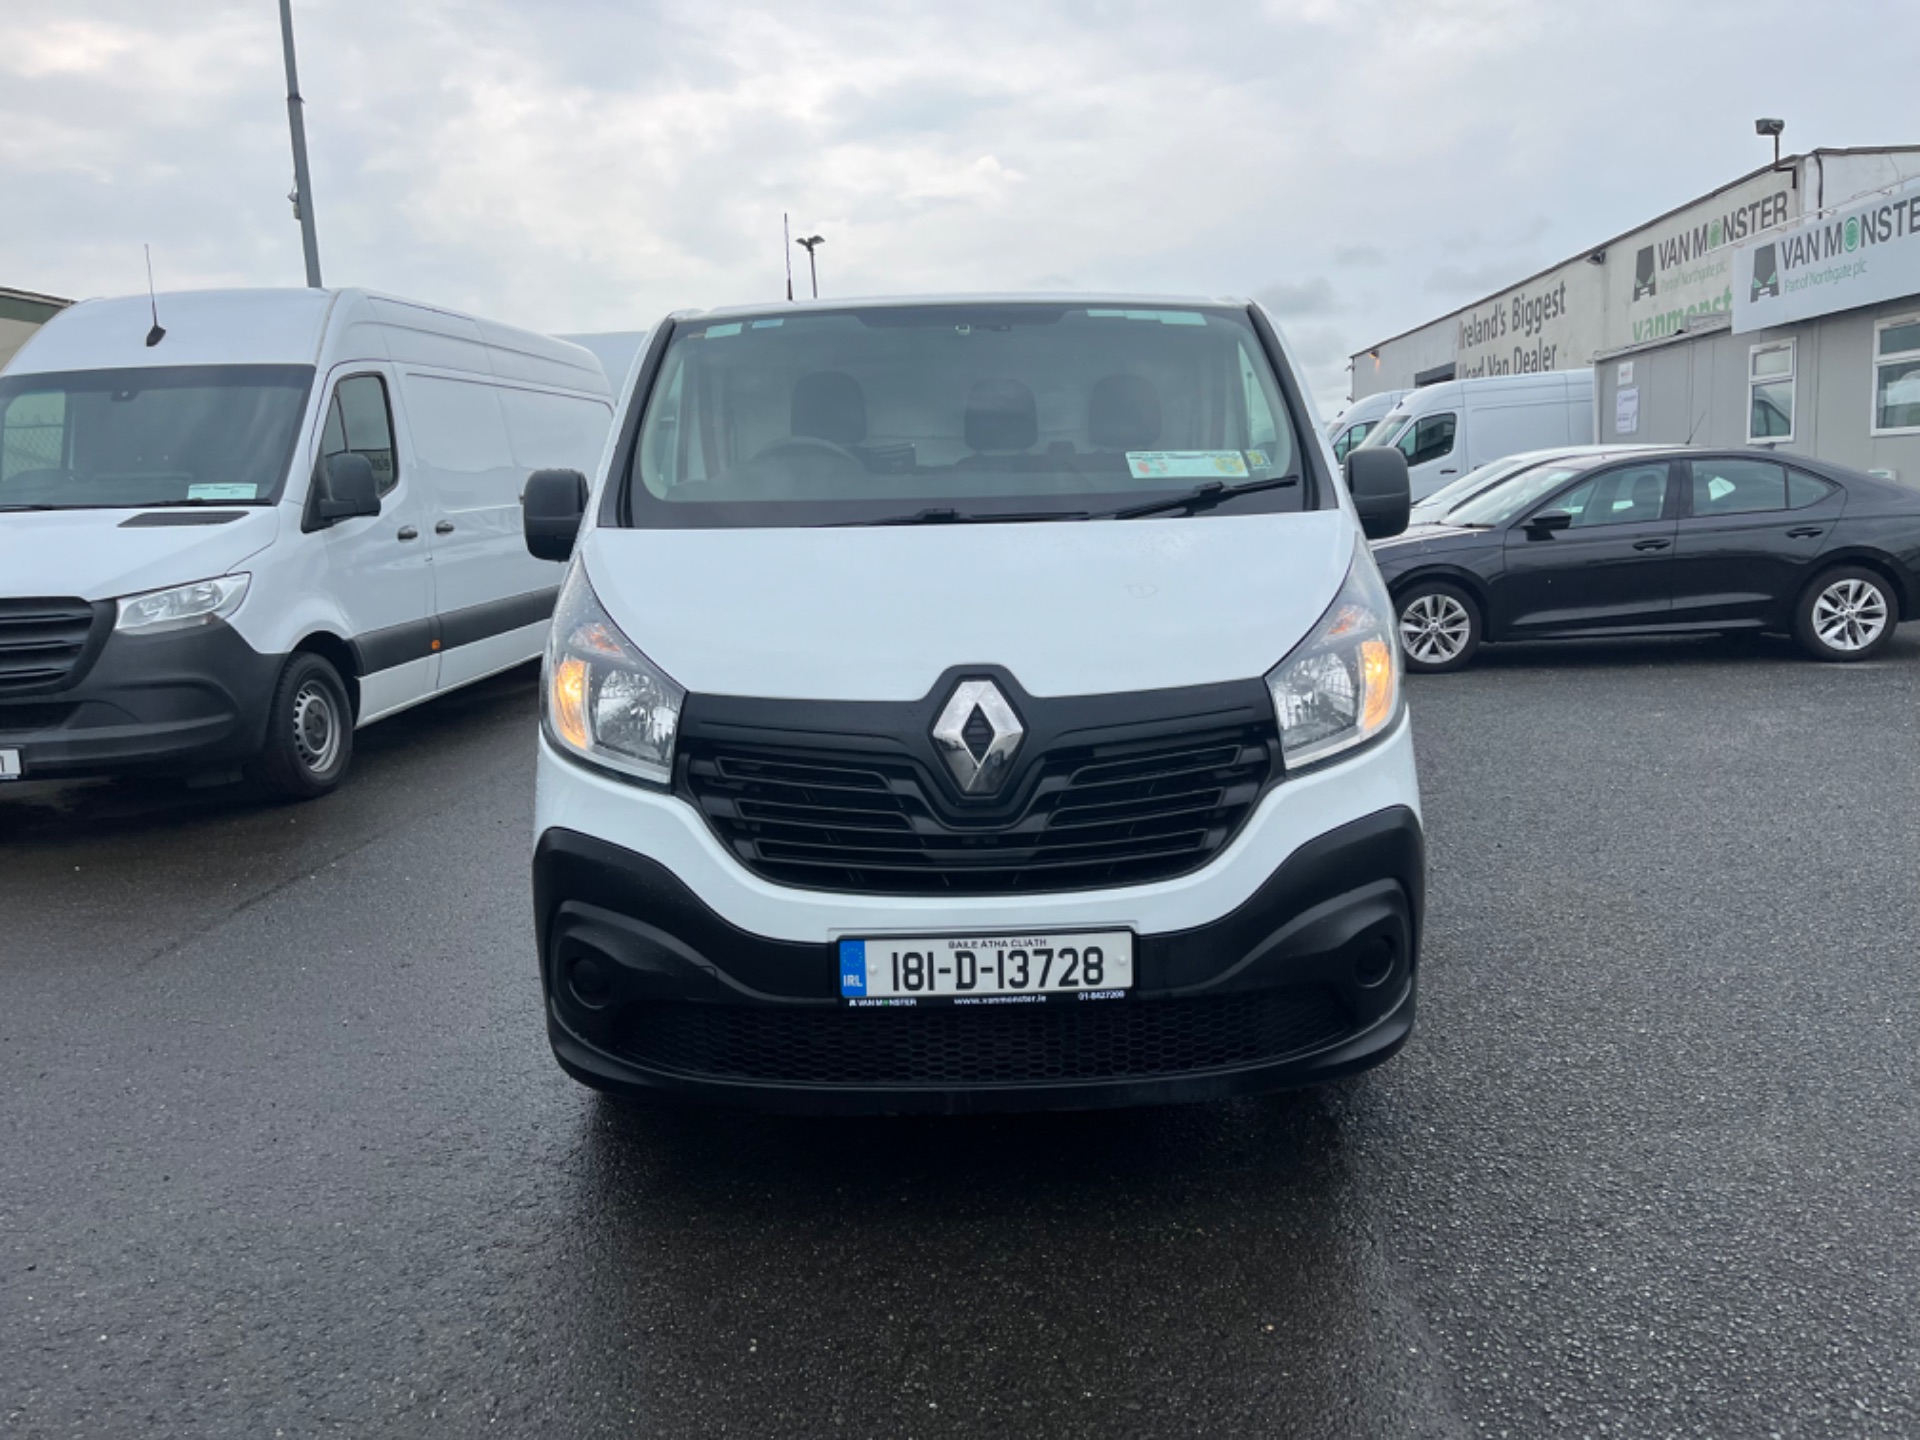 2018 Renault Trafic LL29 DCI 120 Business 3DR (181D13728) Thumbnail 2